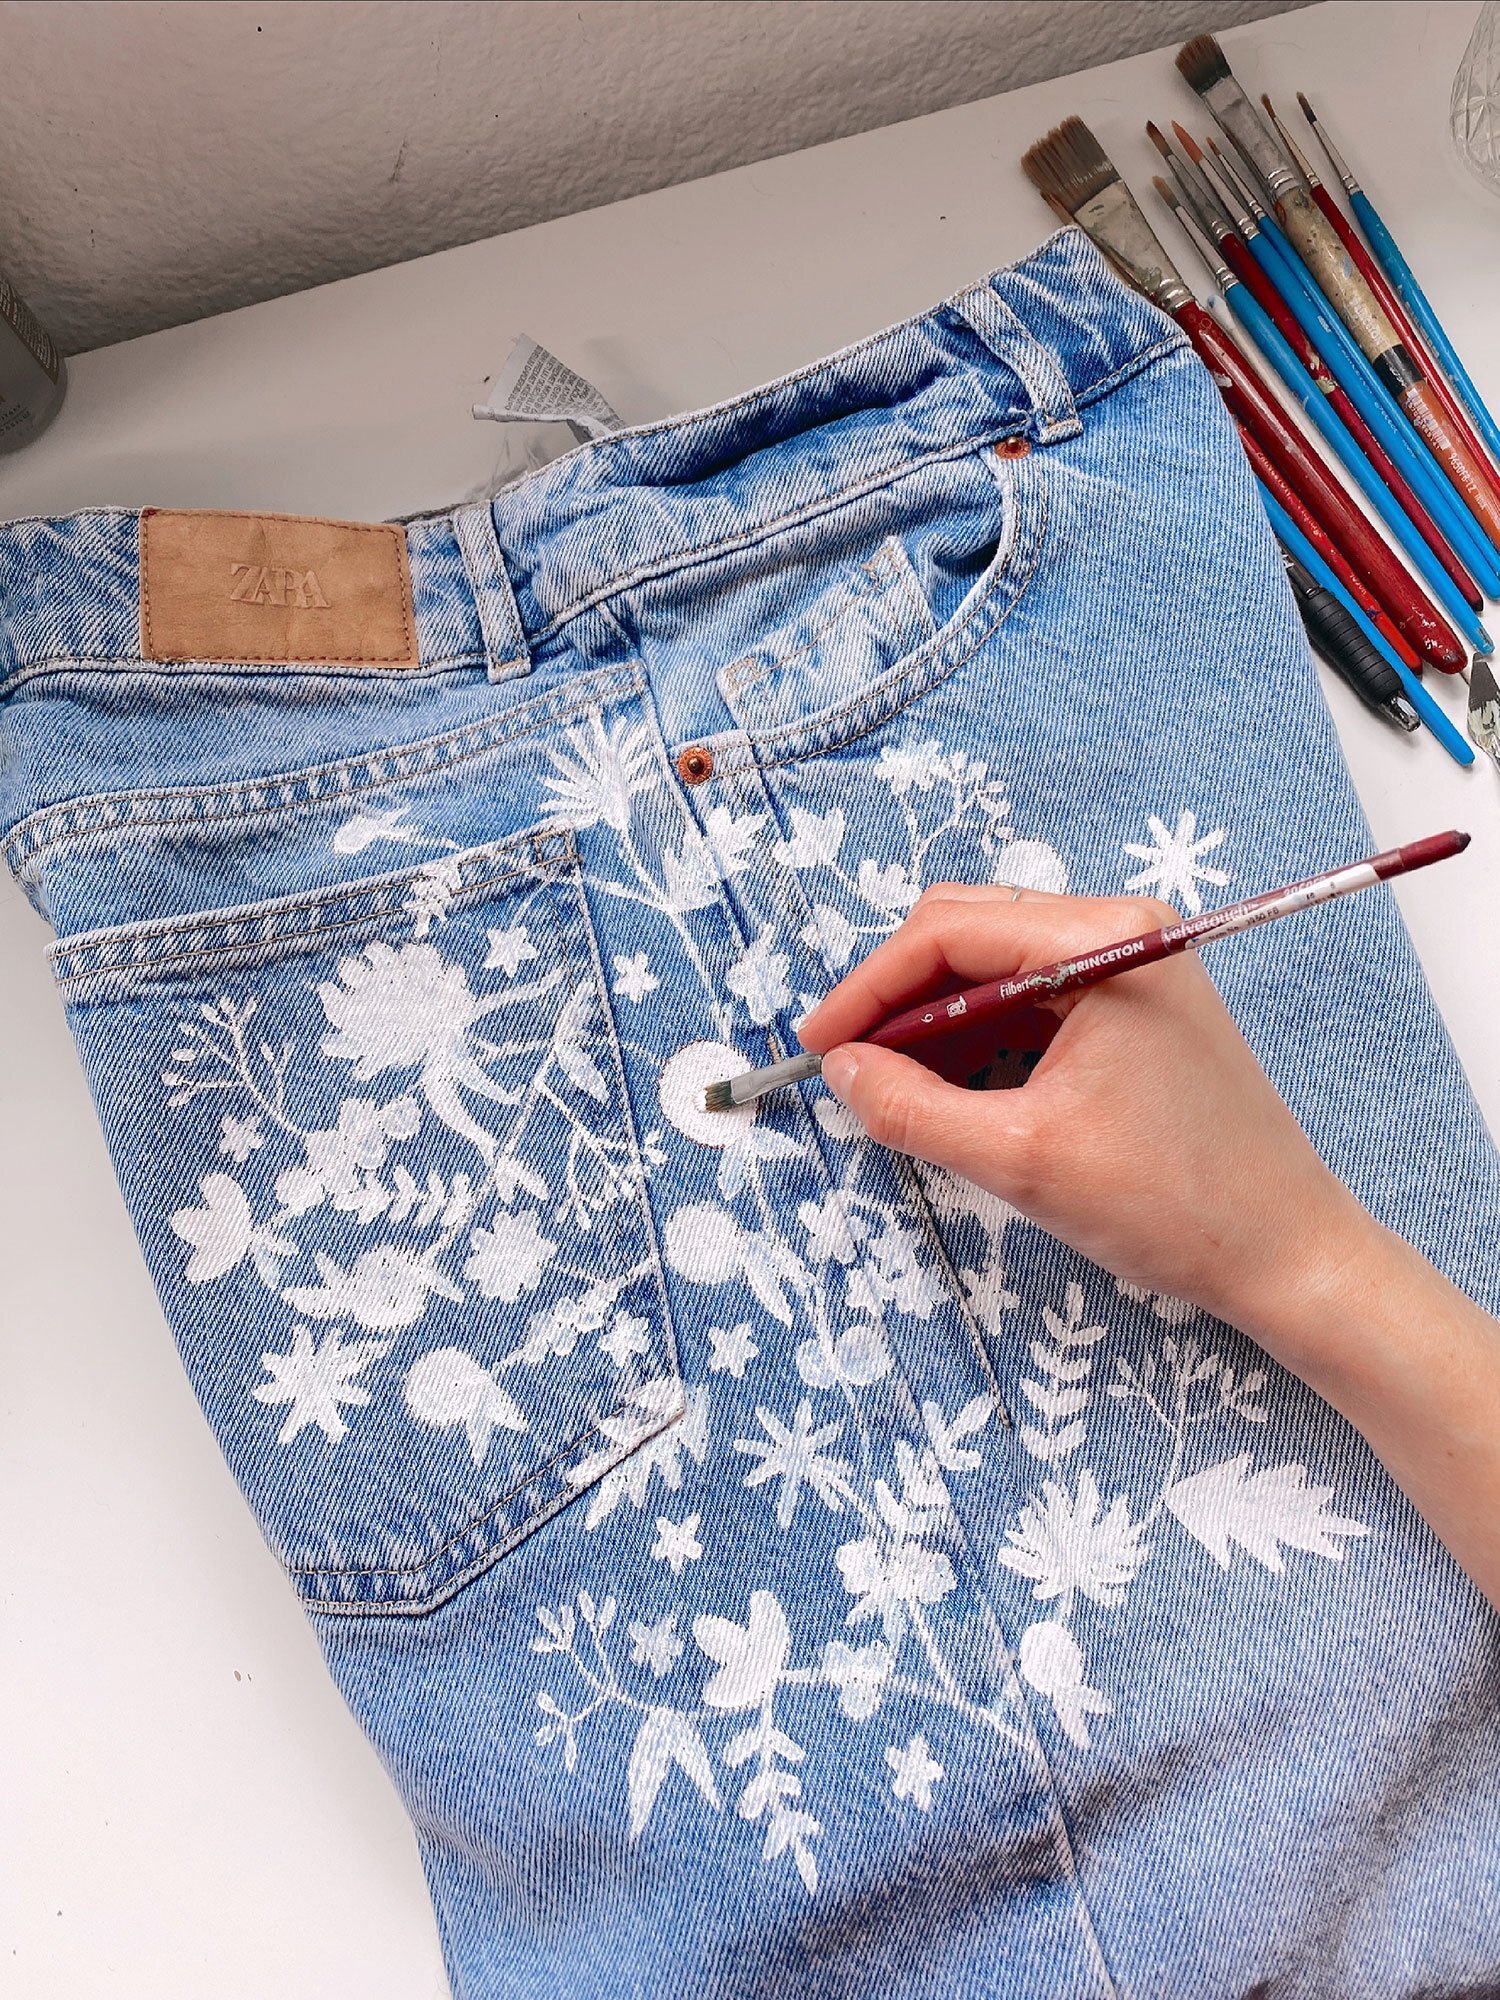 Denim Painting 101: How to Fix Mistakes